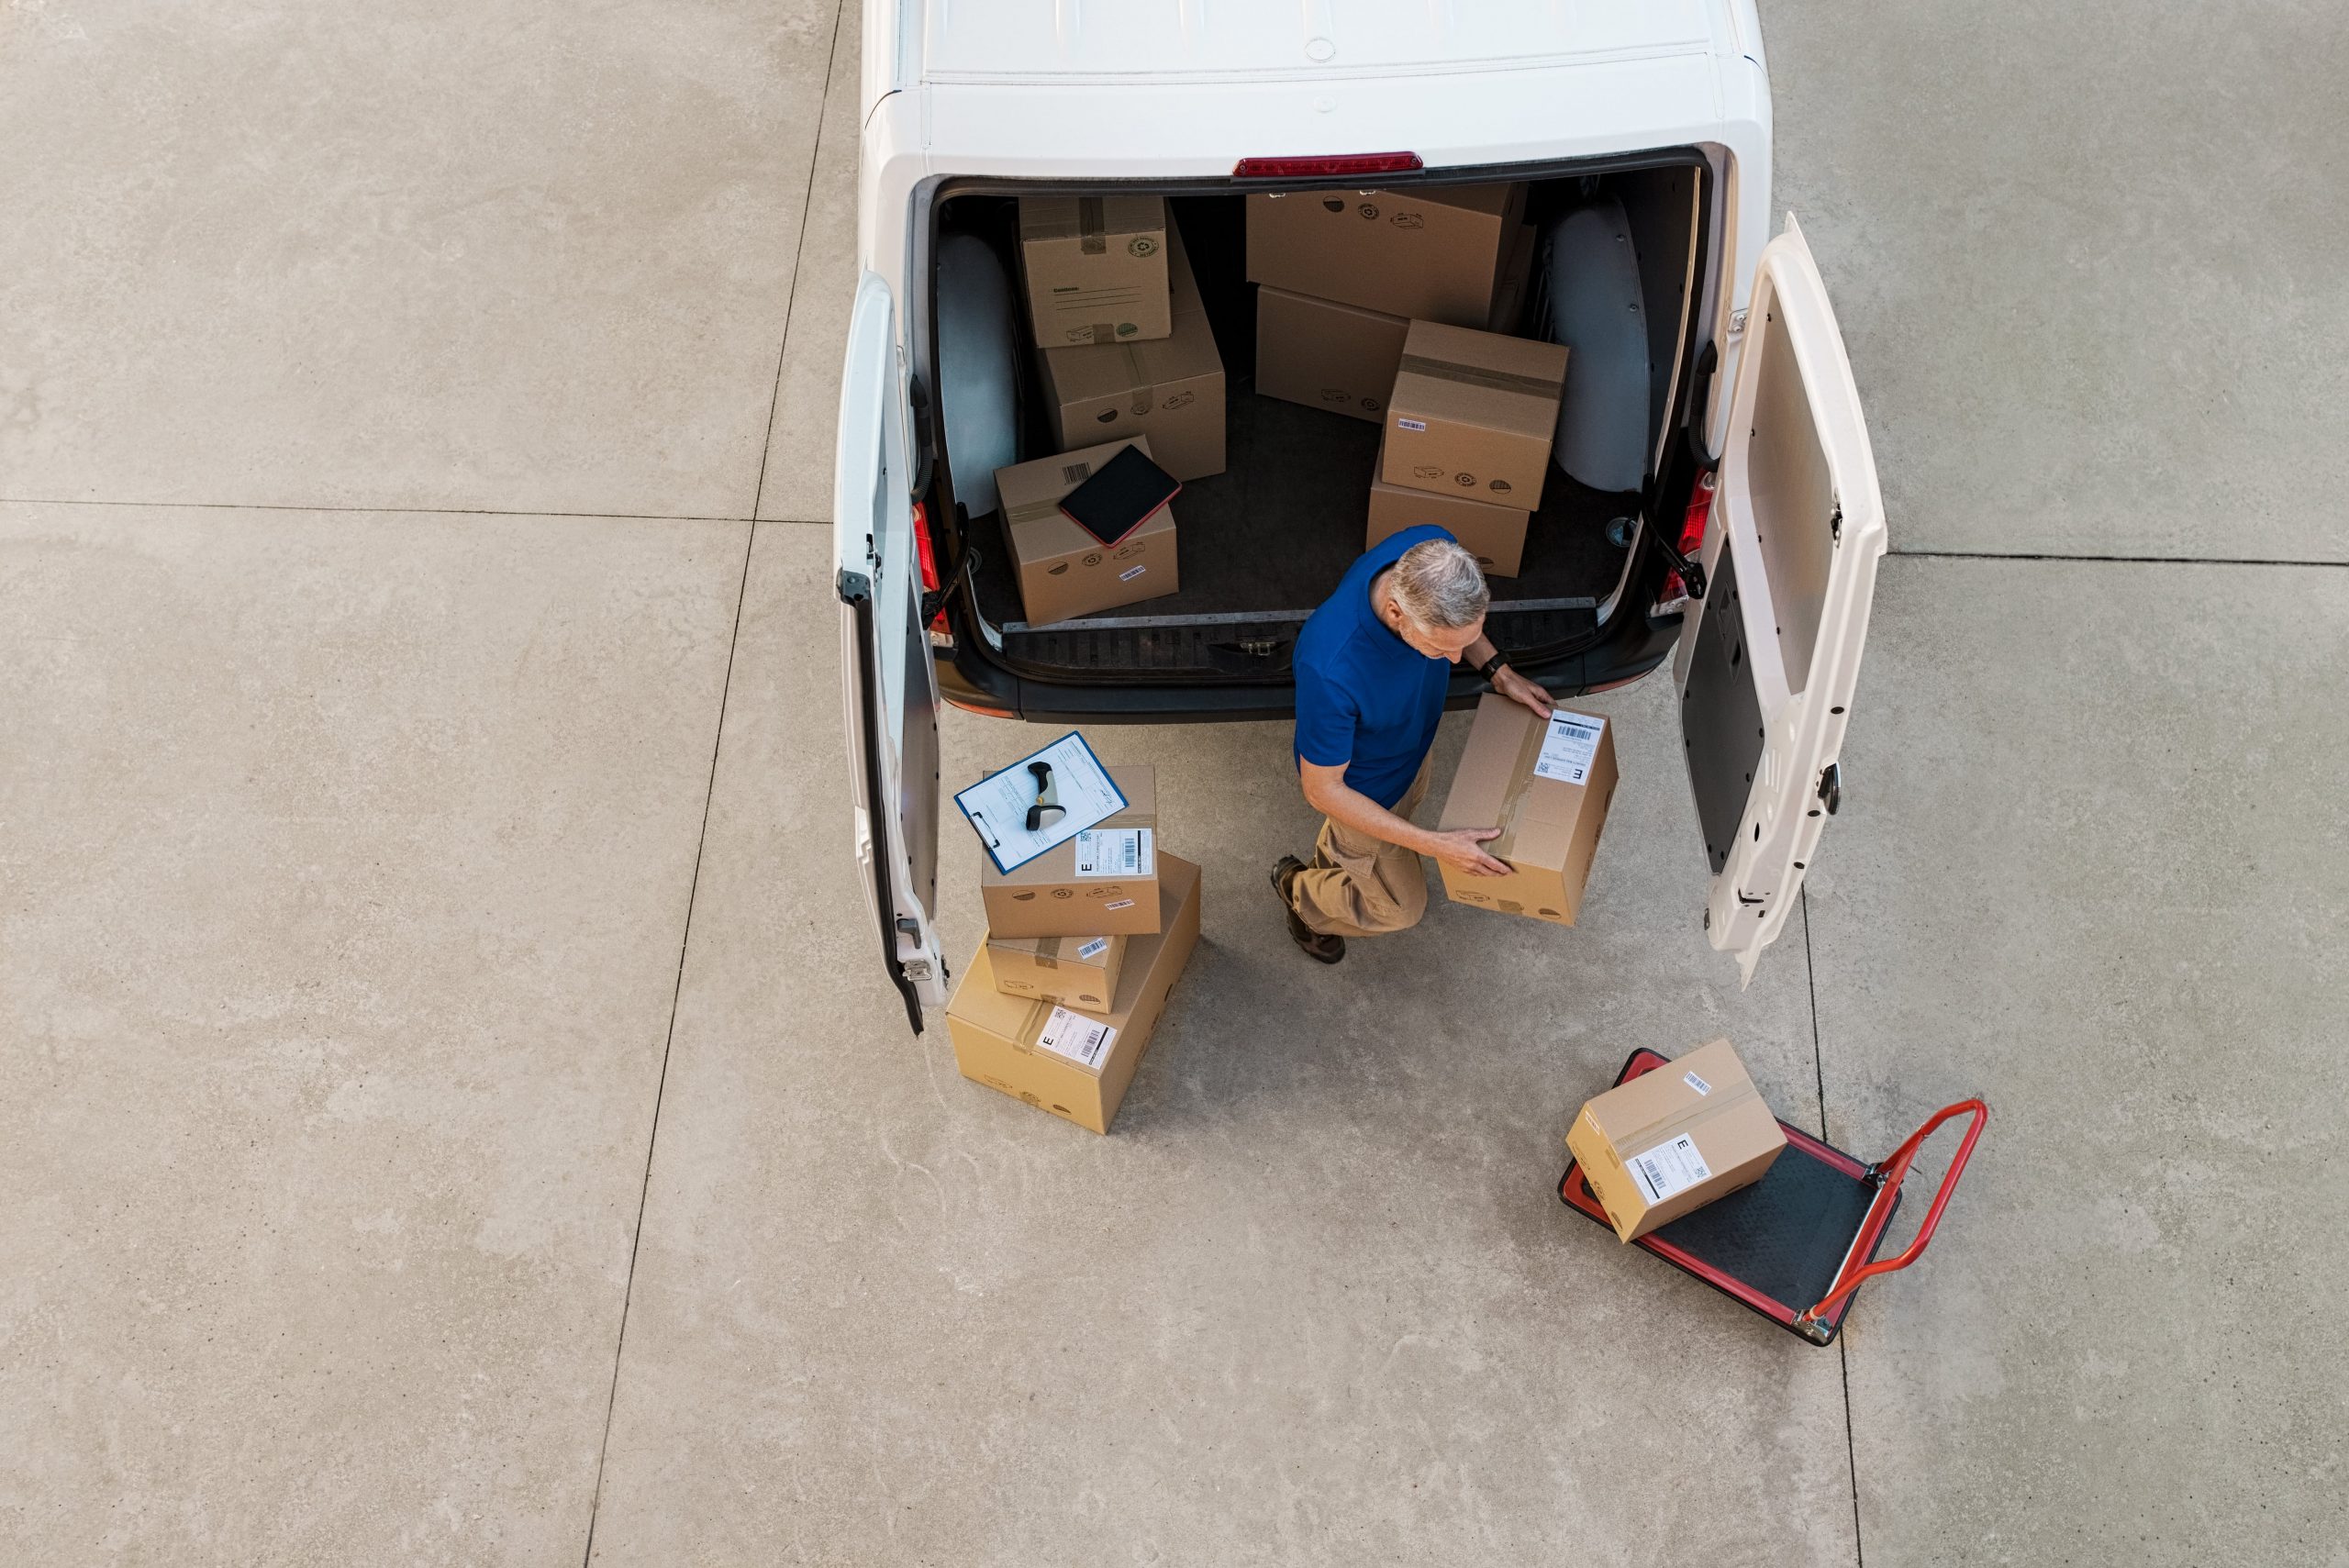 Top 5 parcel delivery companies in the Netherlands for e-commerce